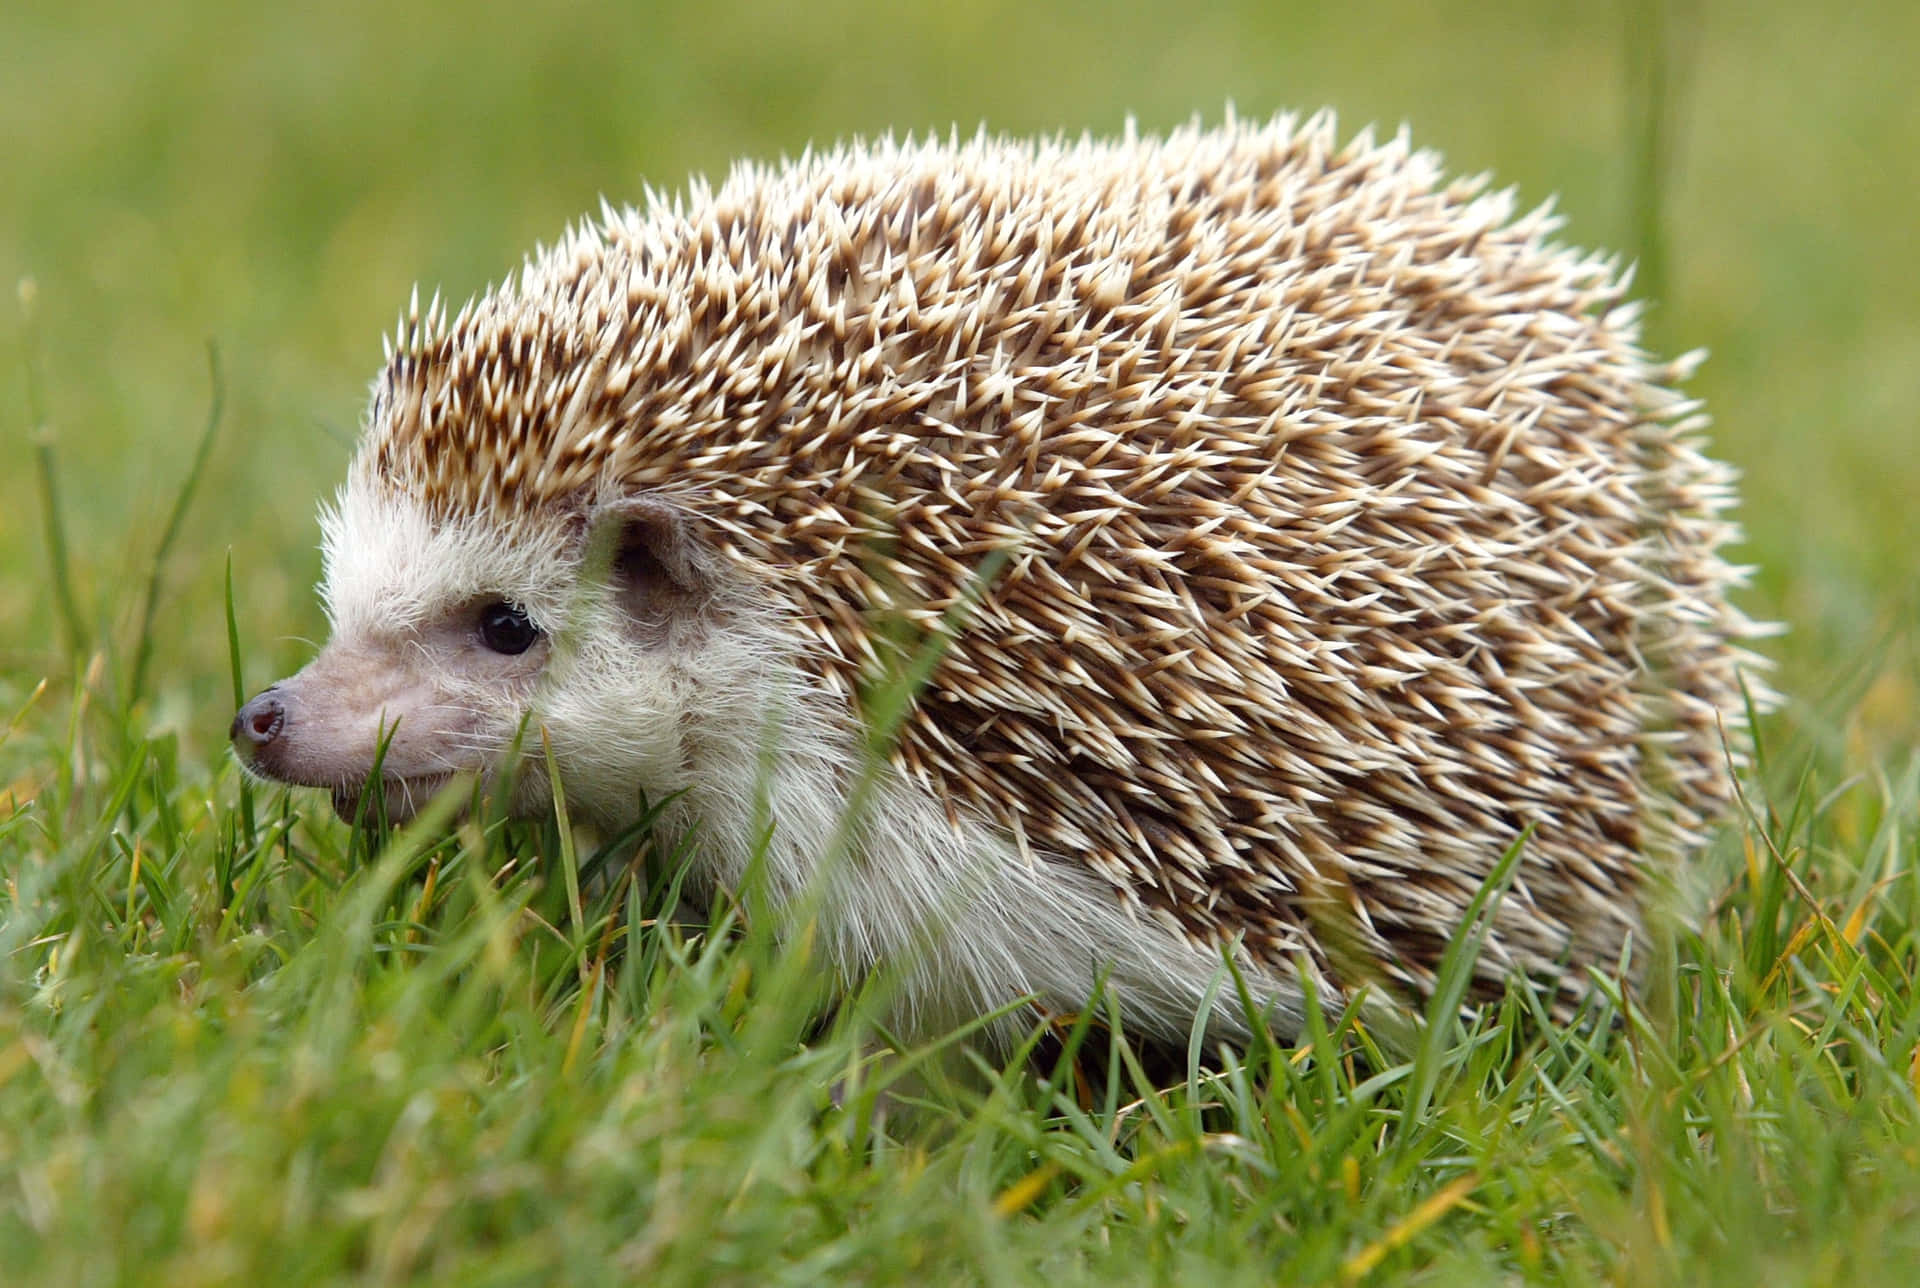 Somali Hedgehog Grass Lawn Picture